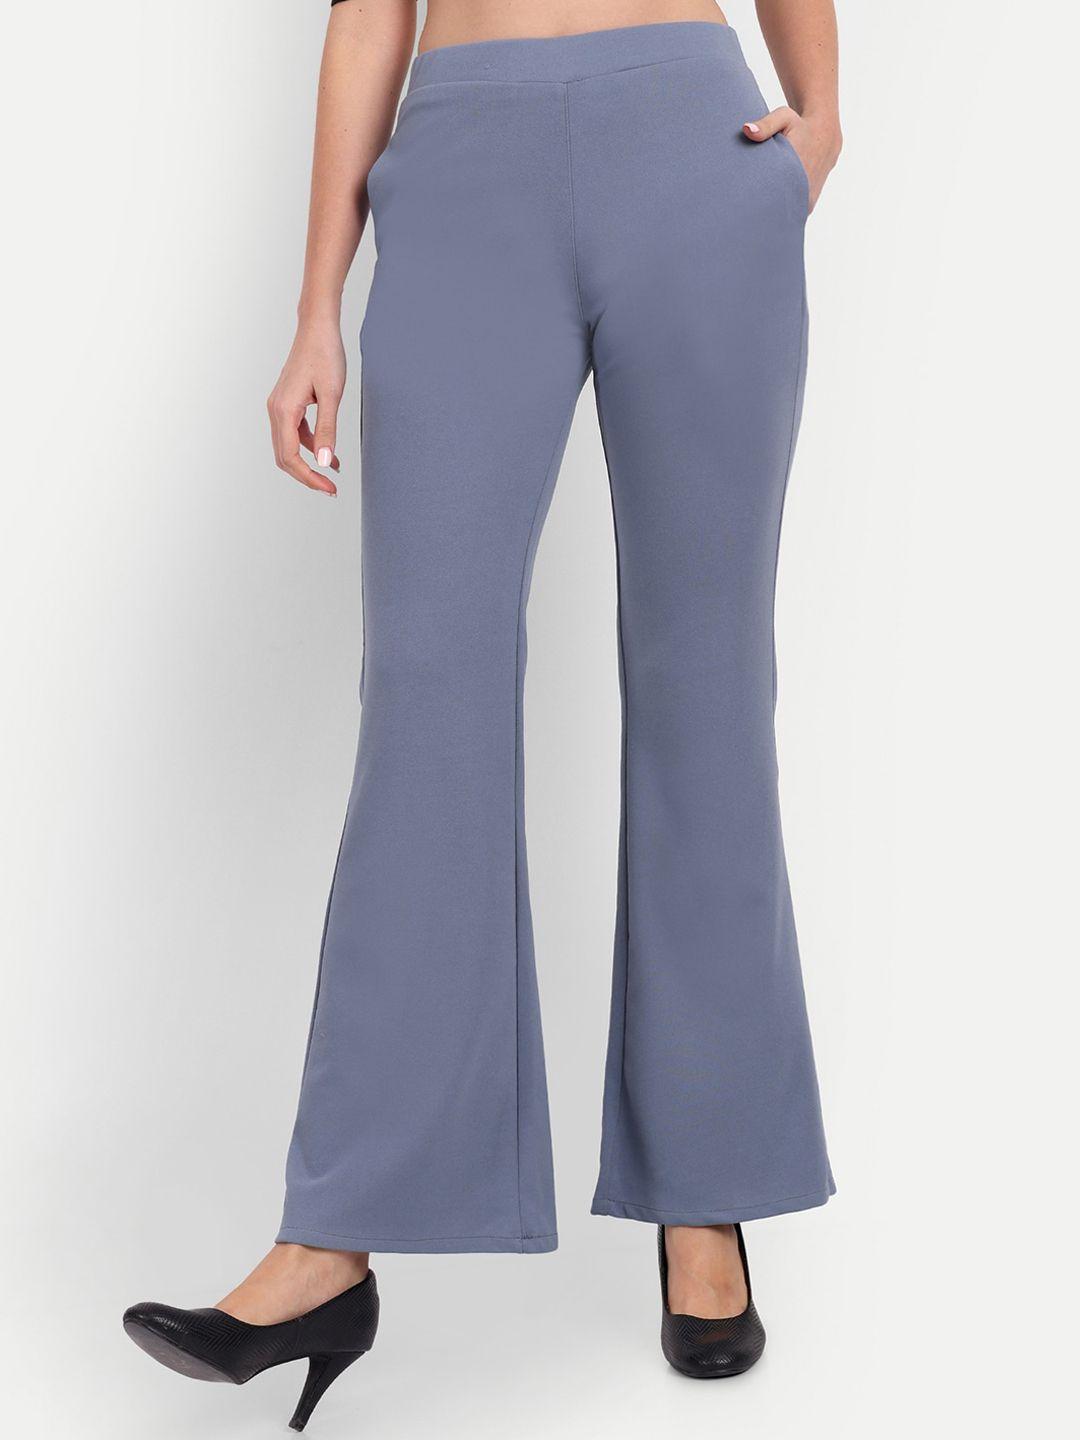 next-one-women-relaxed-flared-high-rise-non-iron-bootcut-trousers